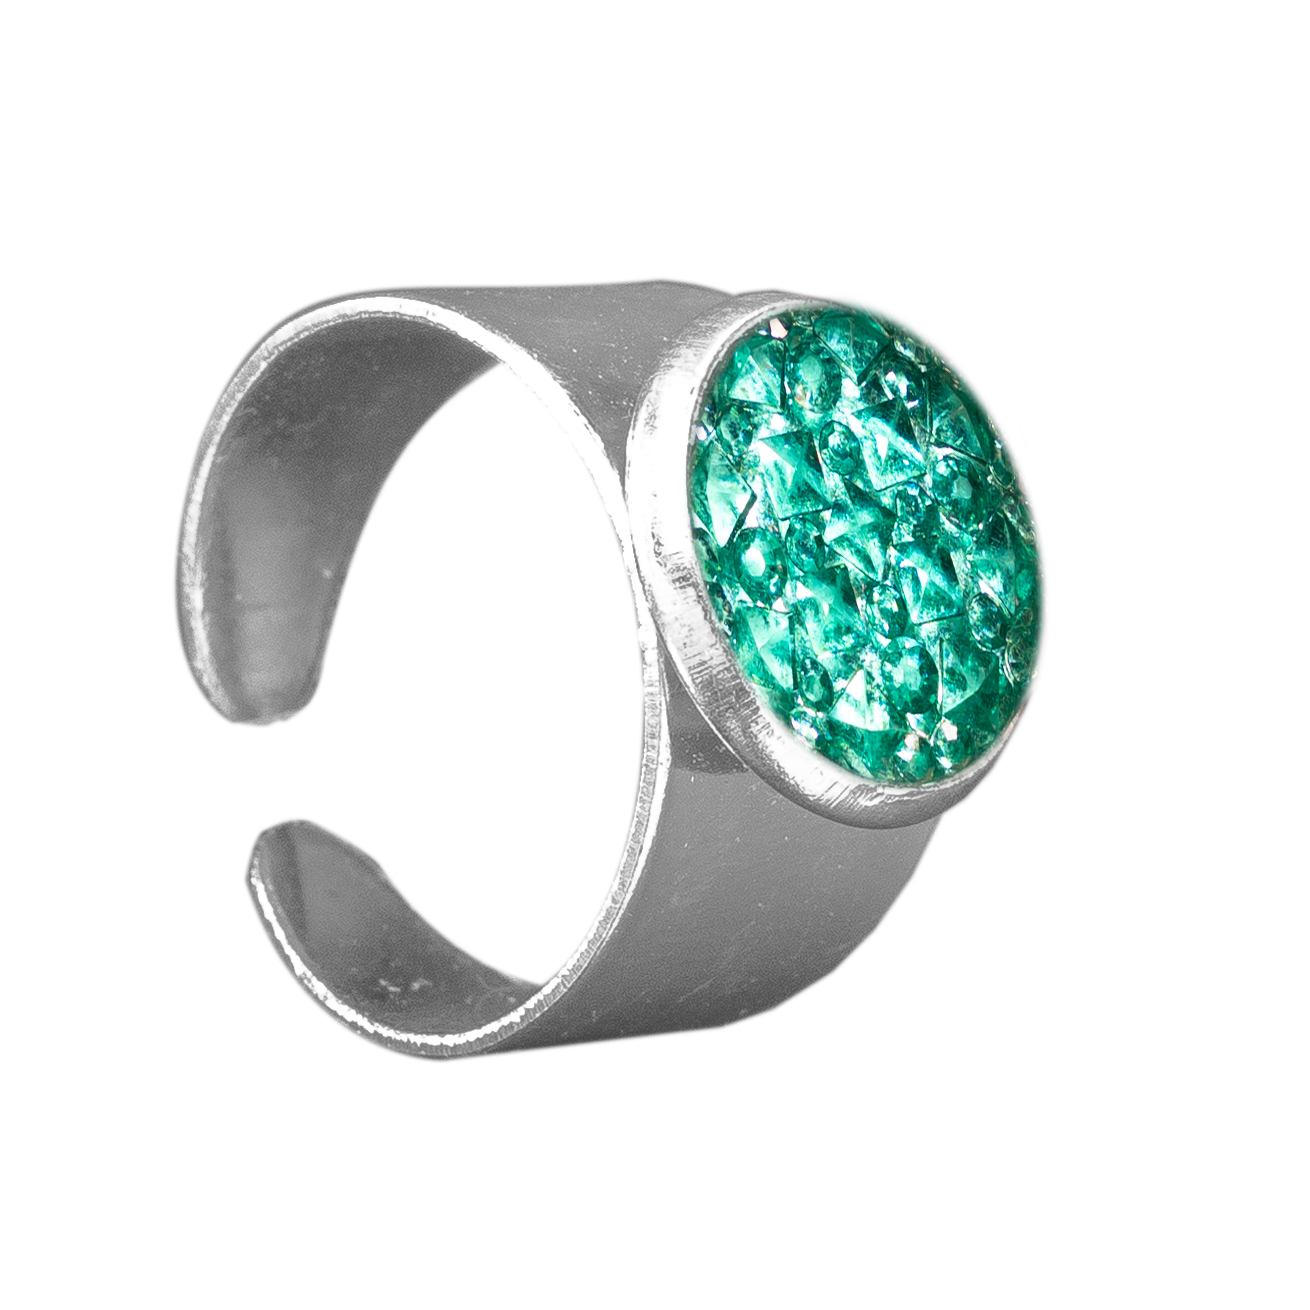 Verstelbare Ring met 12mm Cabochon | One Size | Turquoise Reliëf